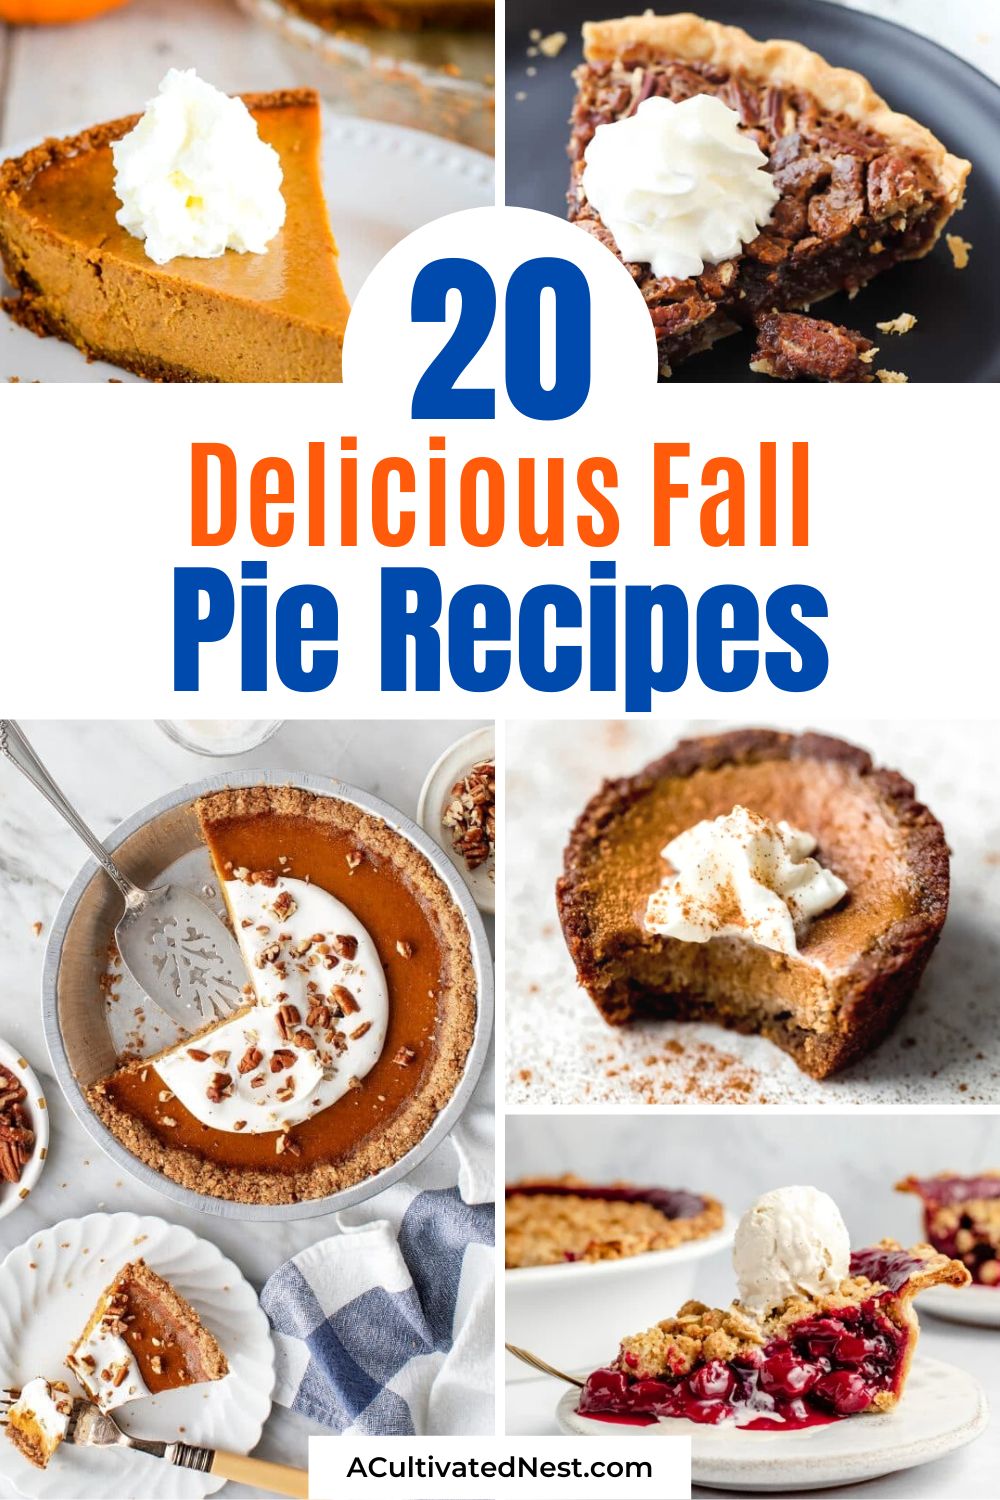 20 Delicious Fall Pie Recipes- Fall makes me want to bake warm and cozy recipes, like these delicious fall pie recipes! They're perfect for Thanksgiving or just for enjoying on a cool night! | apple pie, pumpkin pie, pecan pie, cherry pie, #pieRecipes #desserts #recipes #fallDesserts #ACultivatedNest